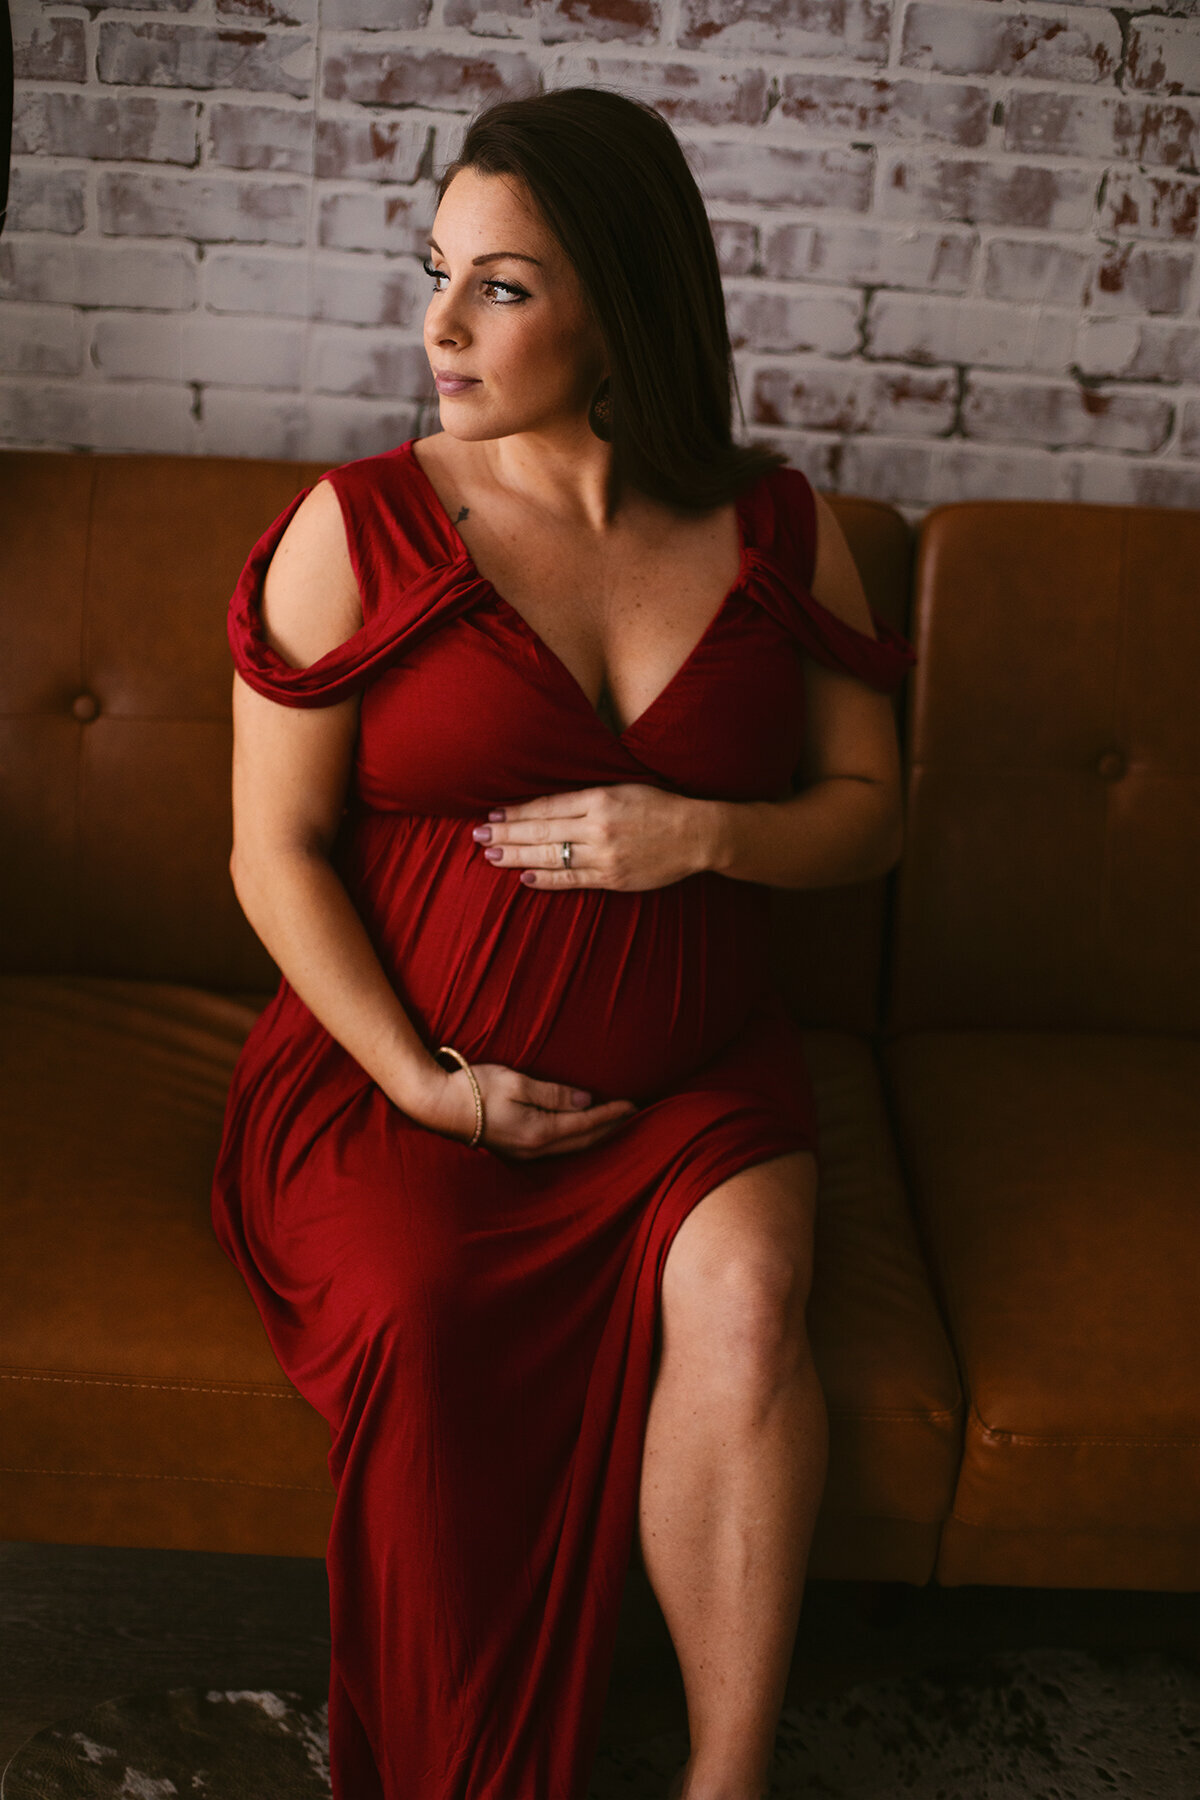 A pregnant woman in a red dress sits on a tan couch while looking out the window during her Bentonville maternity boudoir photoshoot.